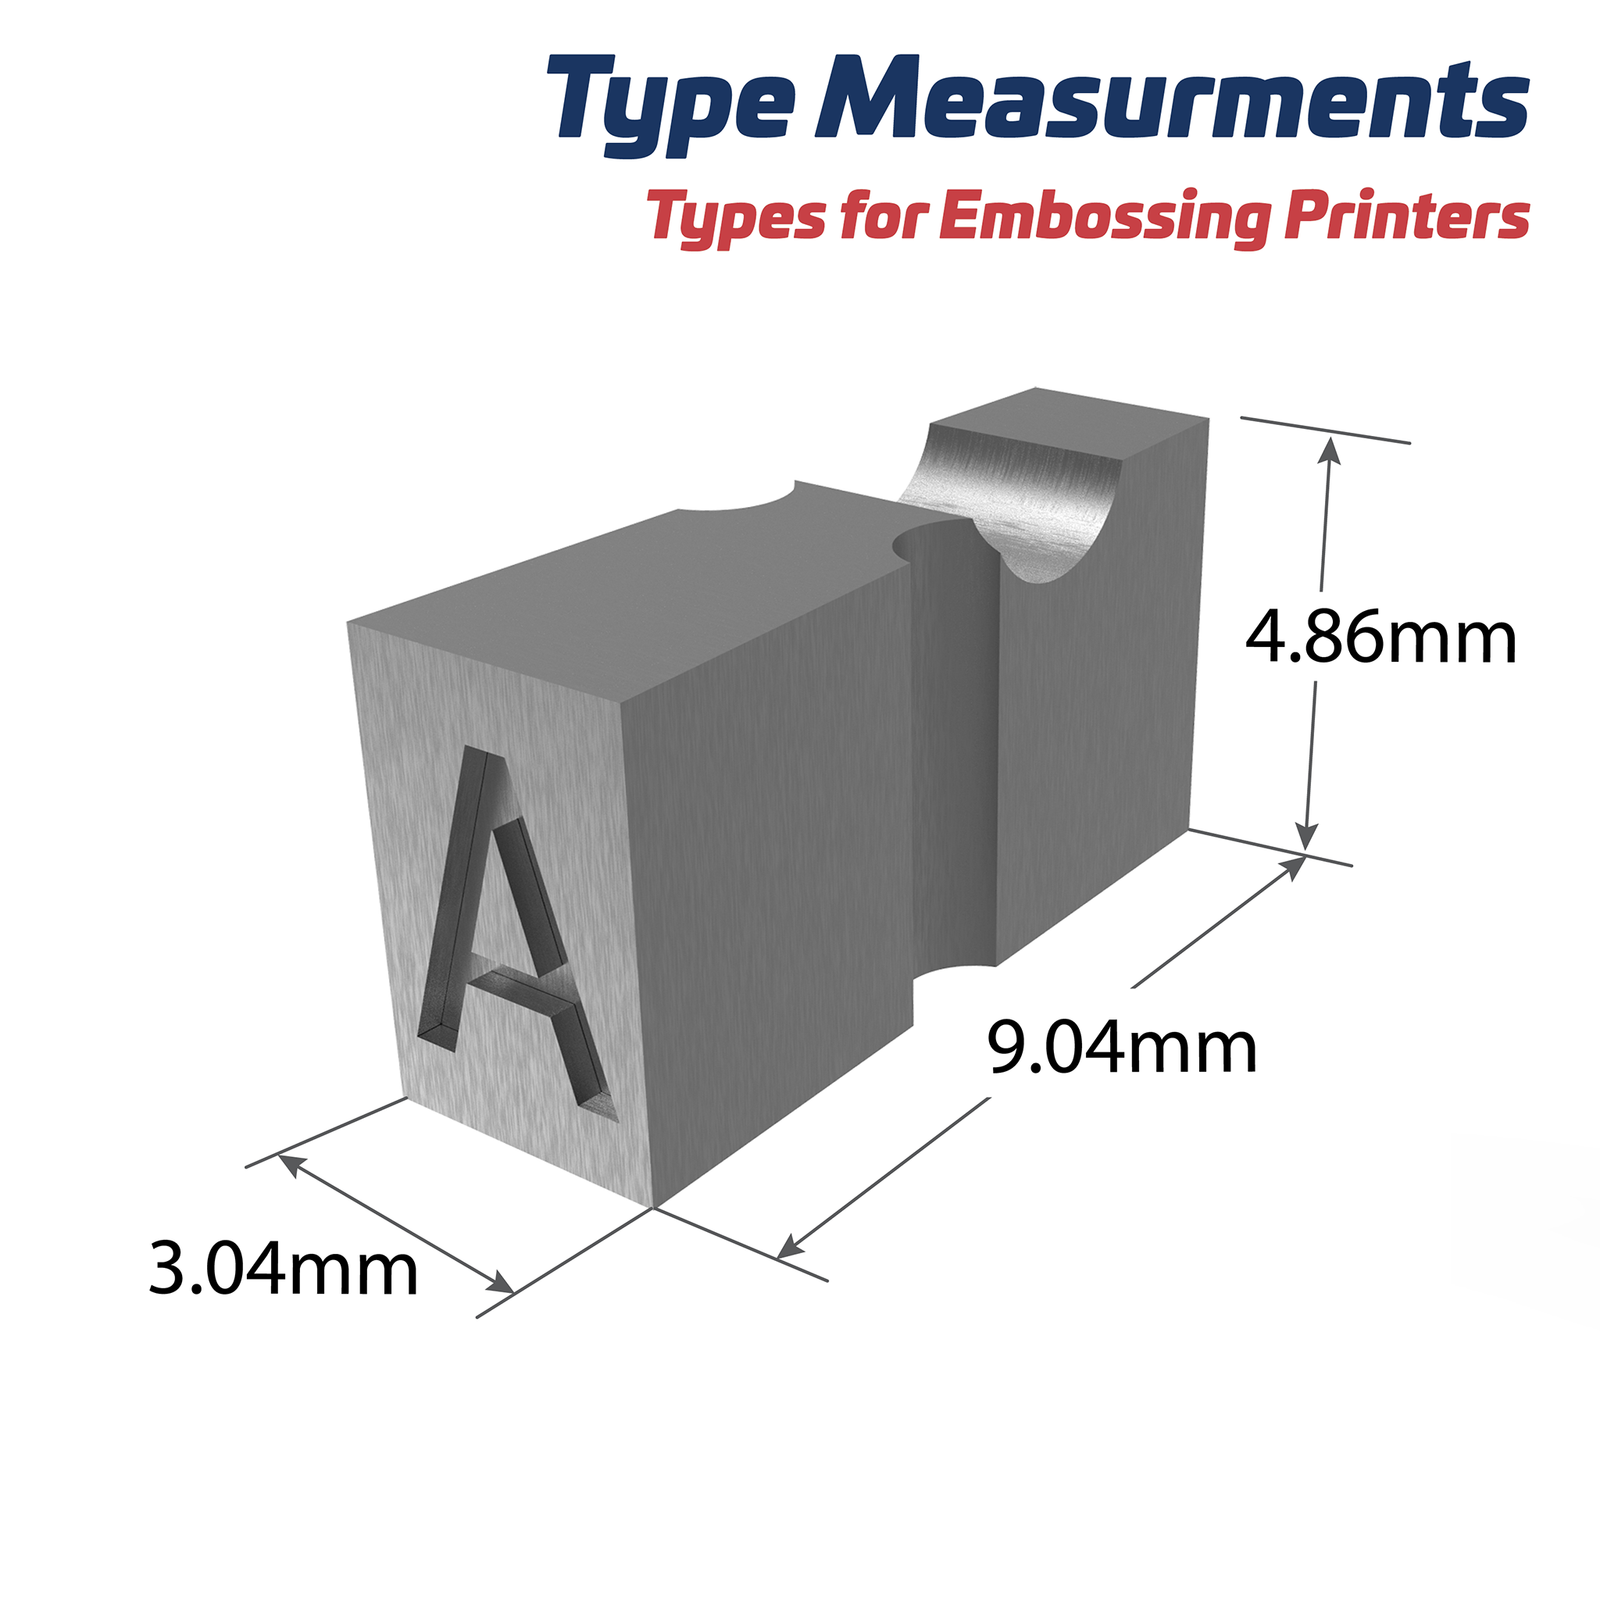 Measurements of a type for embossed printing: 3.04mm, 9.04mm, 4.86 mm